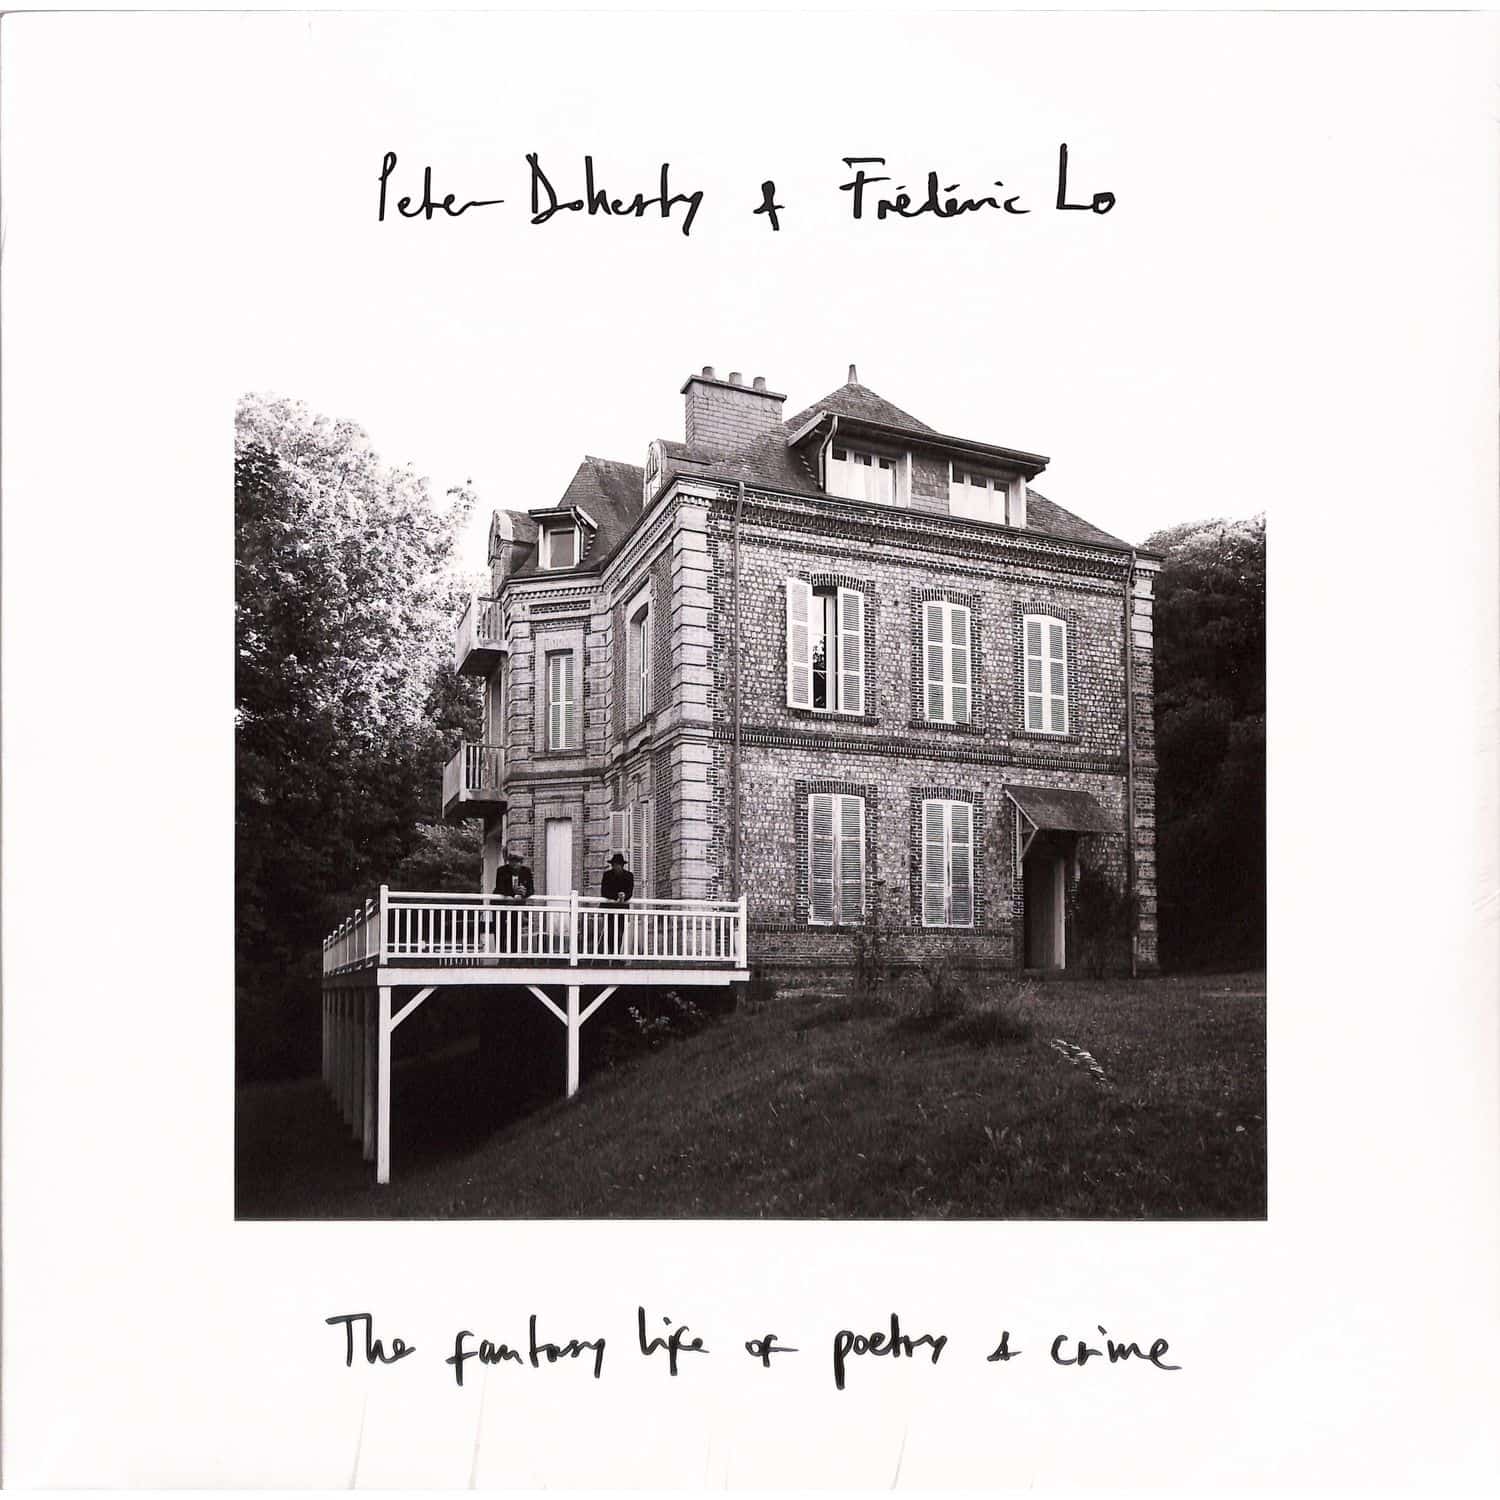 Peter Doherty & Frederic Lo - FANTASY LIFE OF POETRY & CRIME 